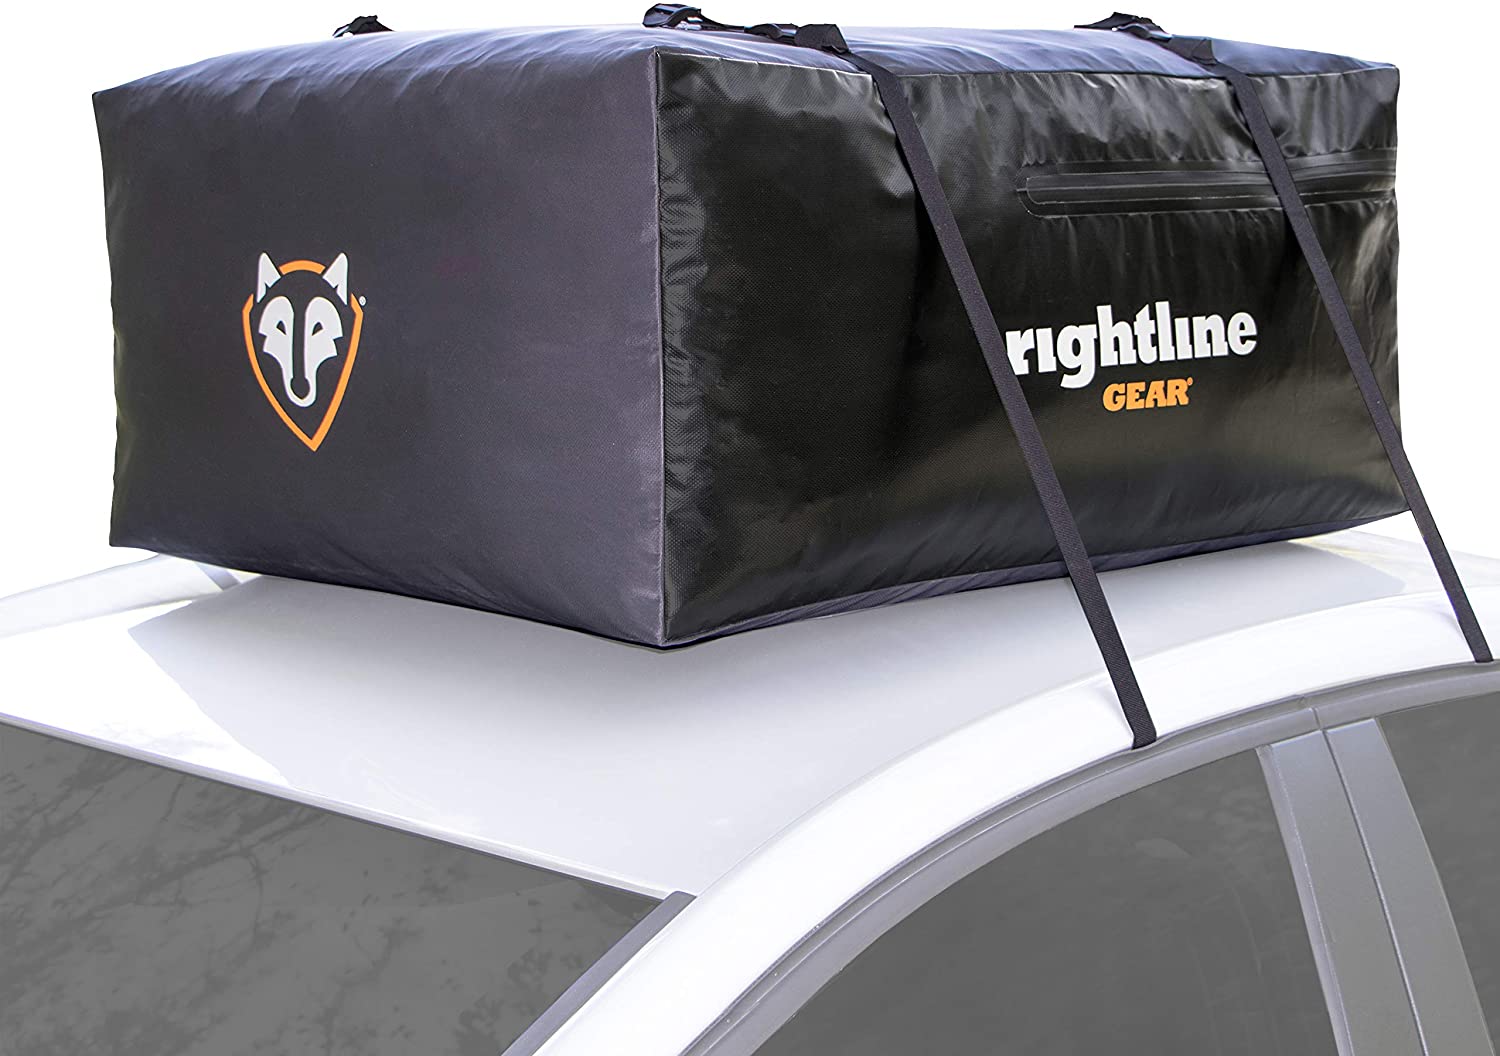 Rightline Gear Sport Jr Car Top Carrier, 10 cu ft Sized for Compact Cars, 100% Waterproof Zipper, Attaches With or Without Roof Rack, 100S50